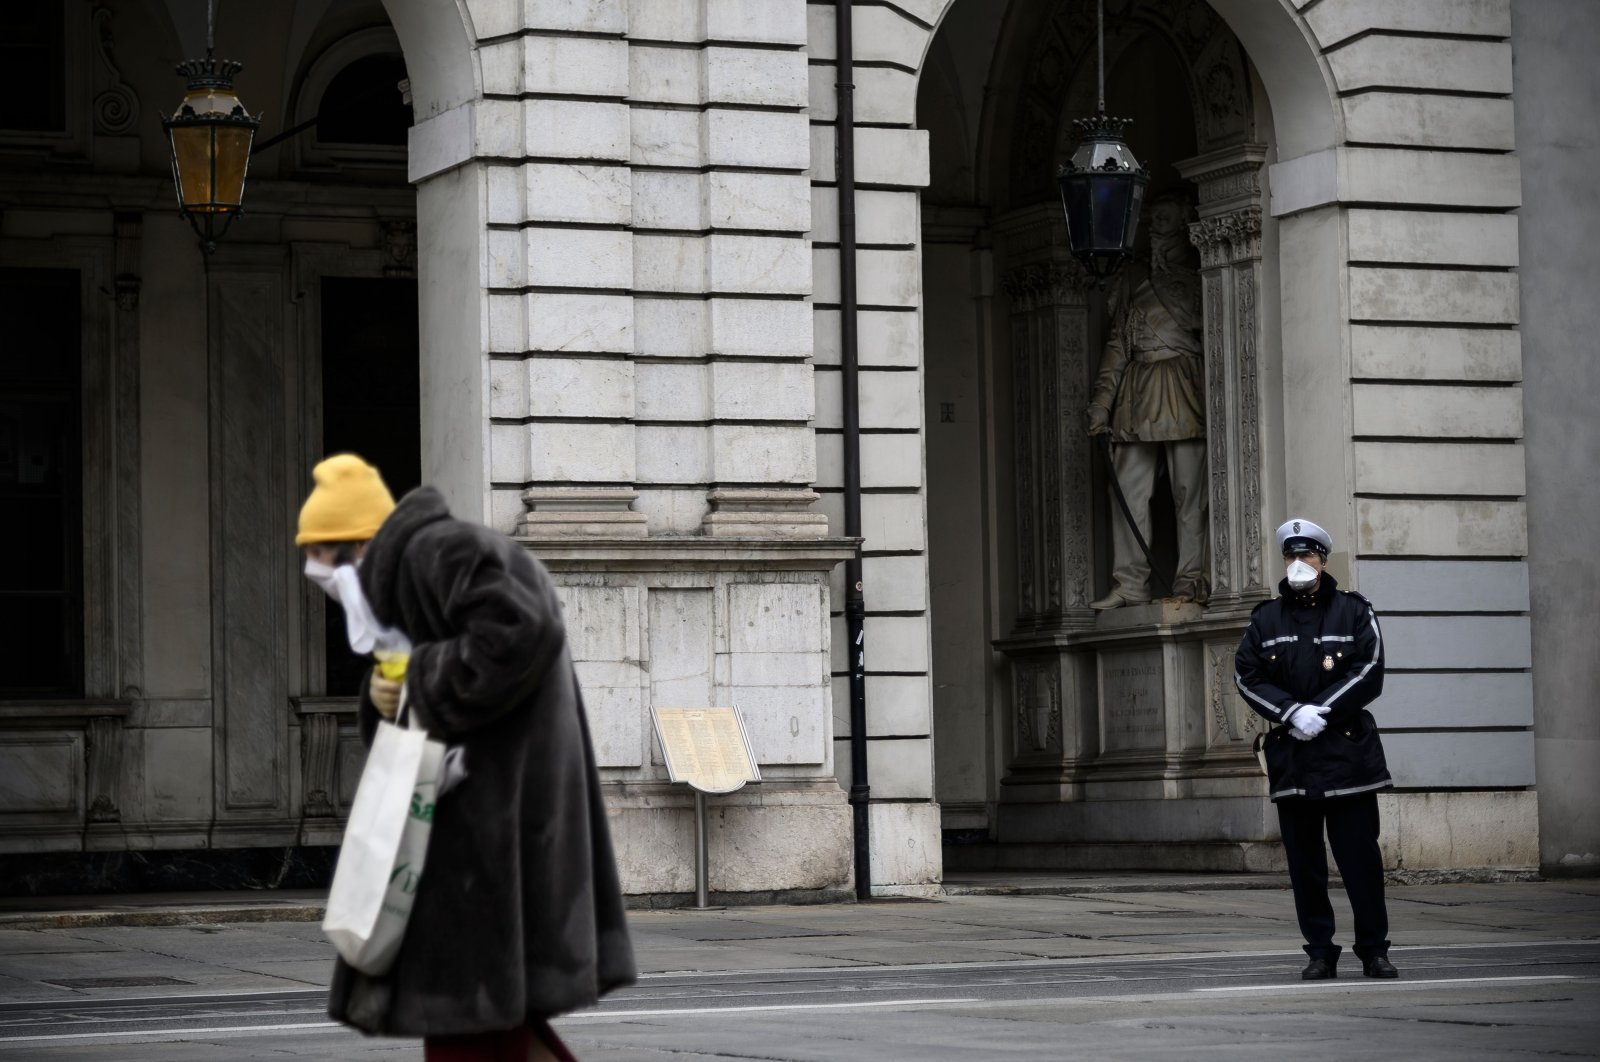 An elderly woman walks past a policeman during a minute of silence at noon in Turin as flags are being flown at half-mast in cities across Italy to commemorate the victims of the virus, Tuesday,  March 31, 2020. (AFP)